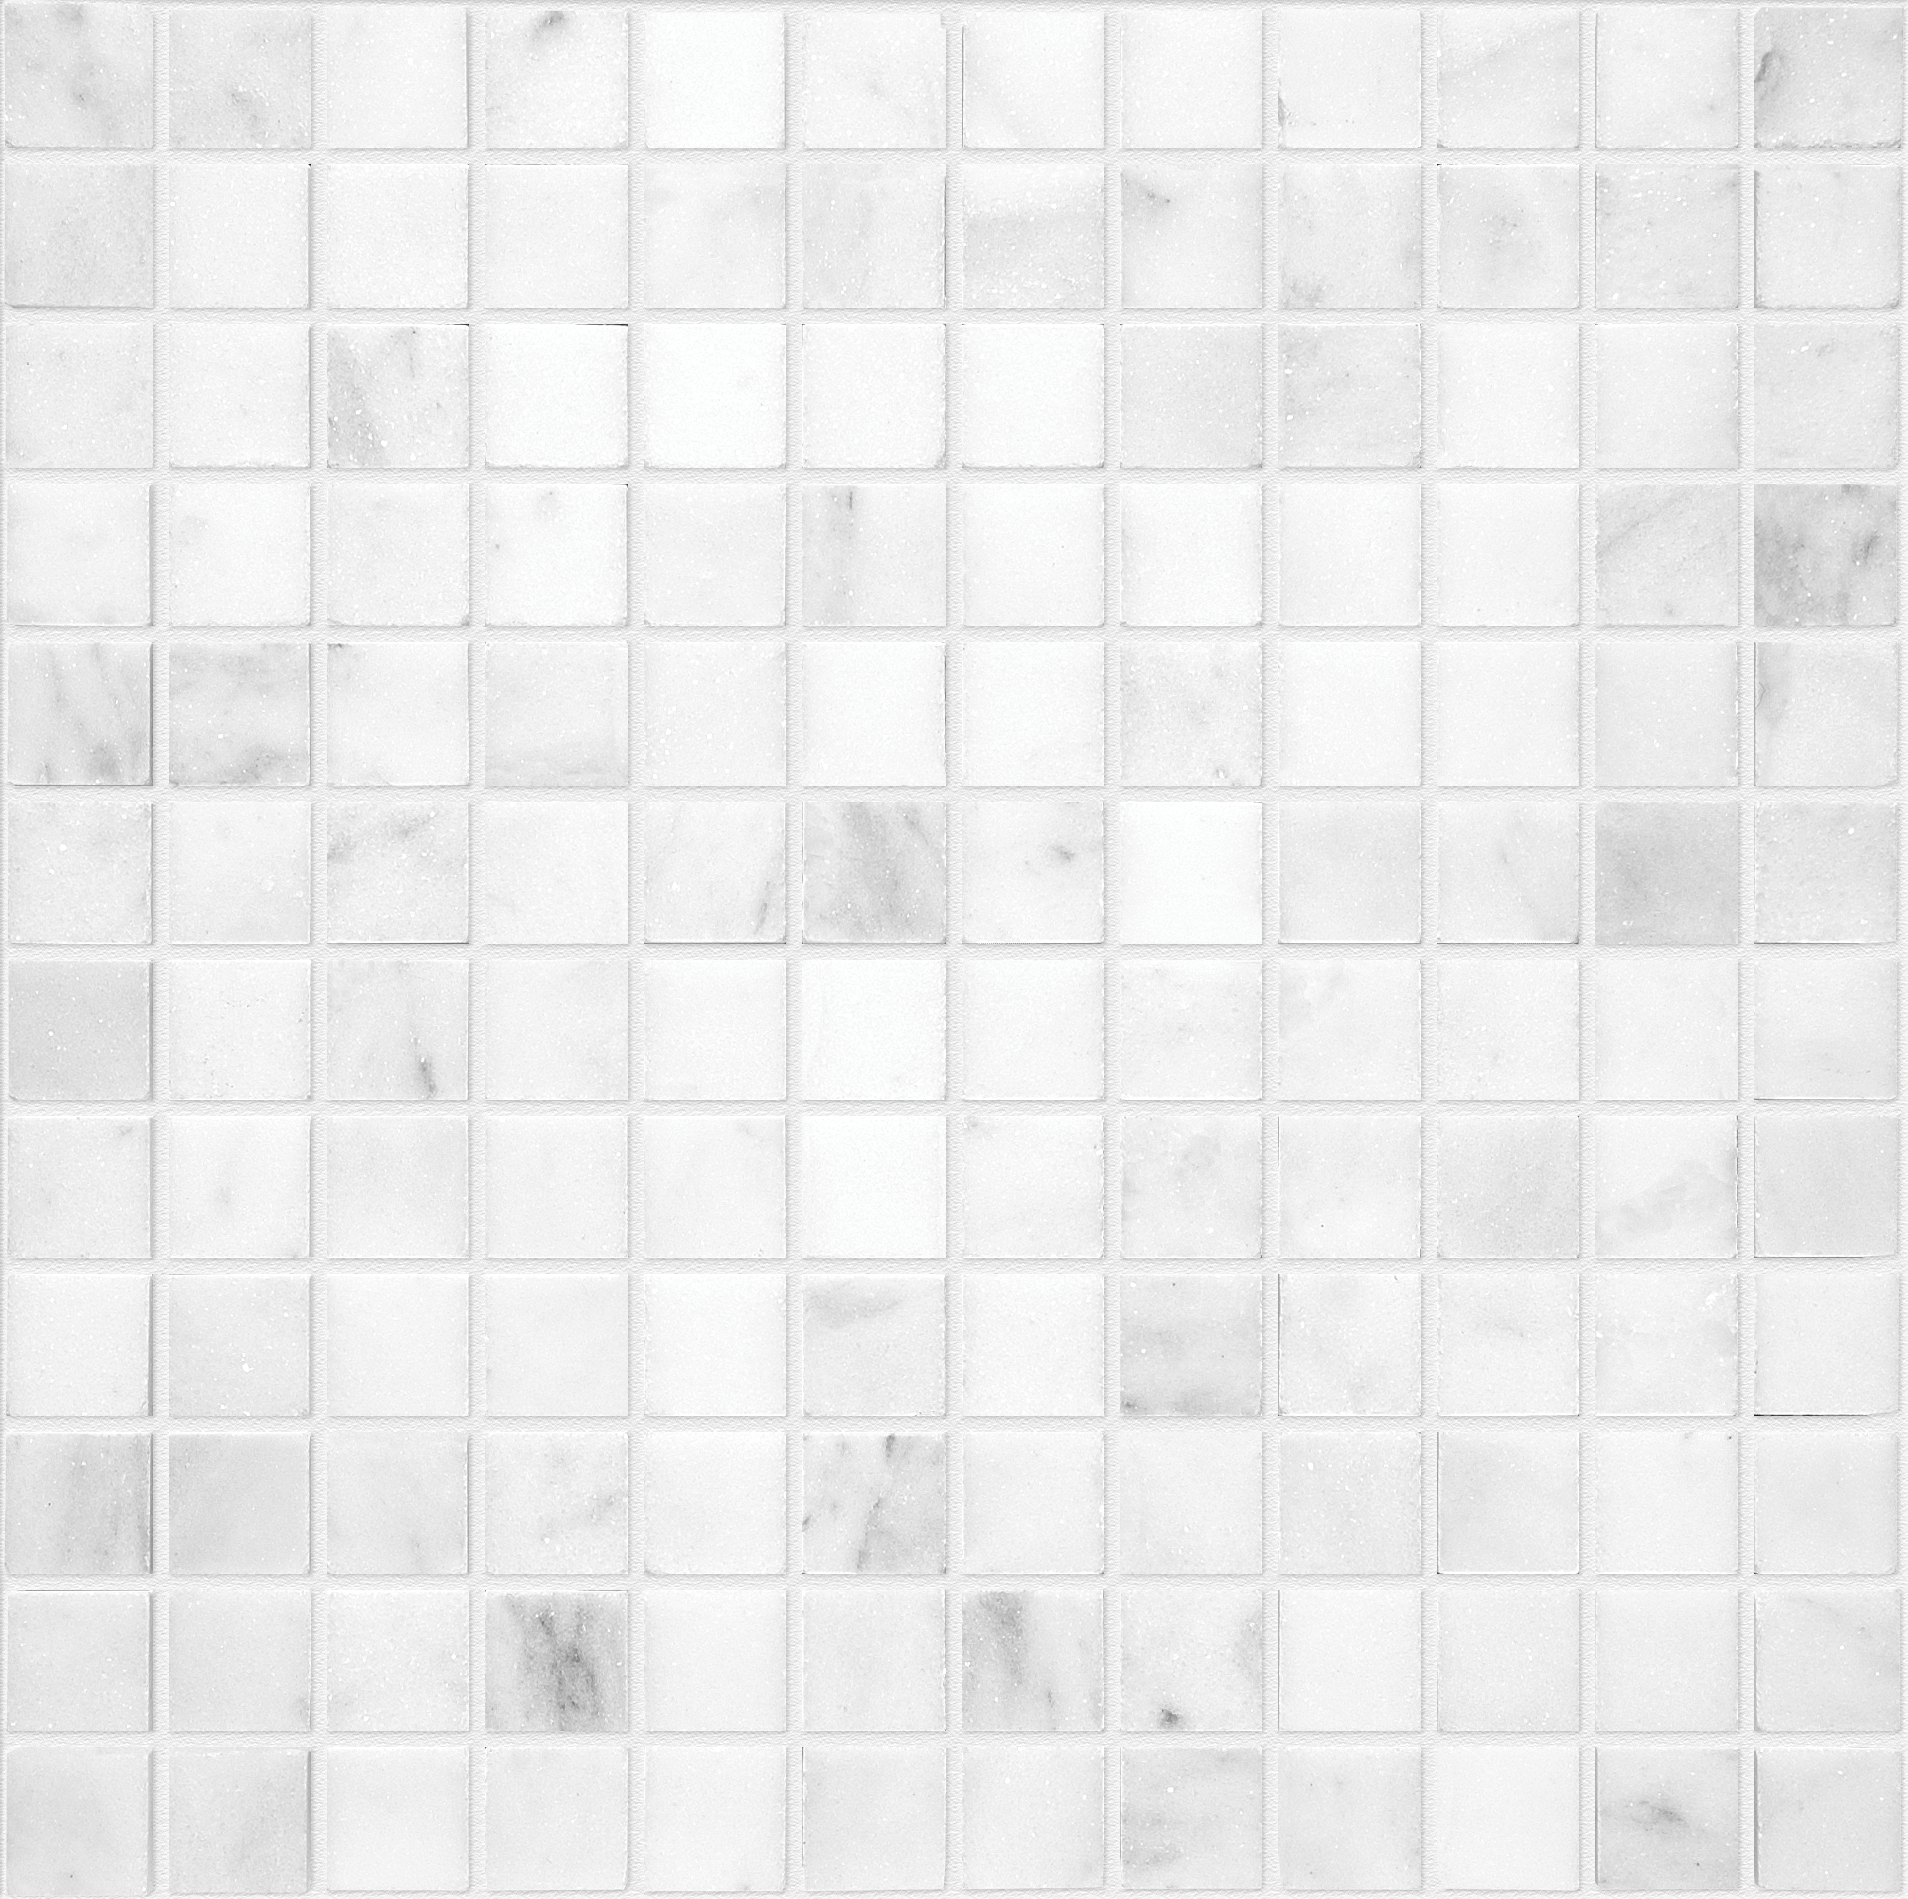 marble straight stack 1x1-inch pattern natural stone mosaic from bianco venatino anatolia collection distributed by surface group international honed finish straight edge edge mesh shape